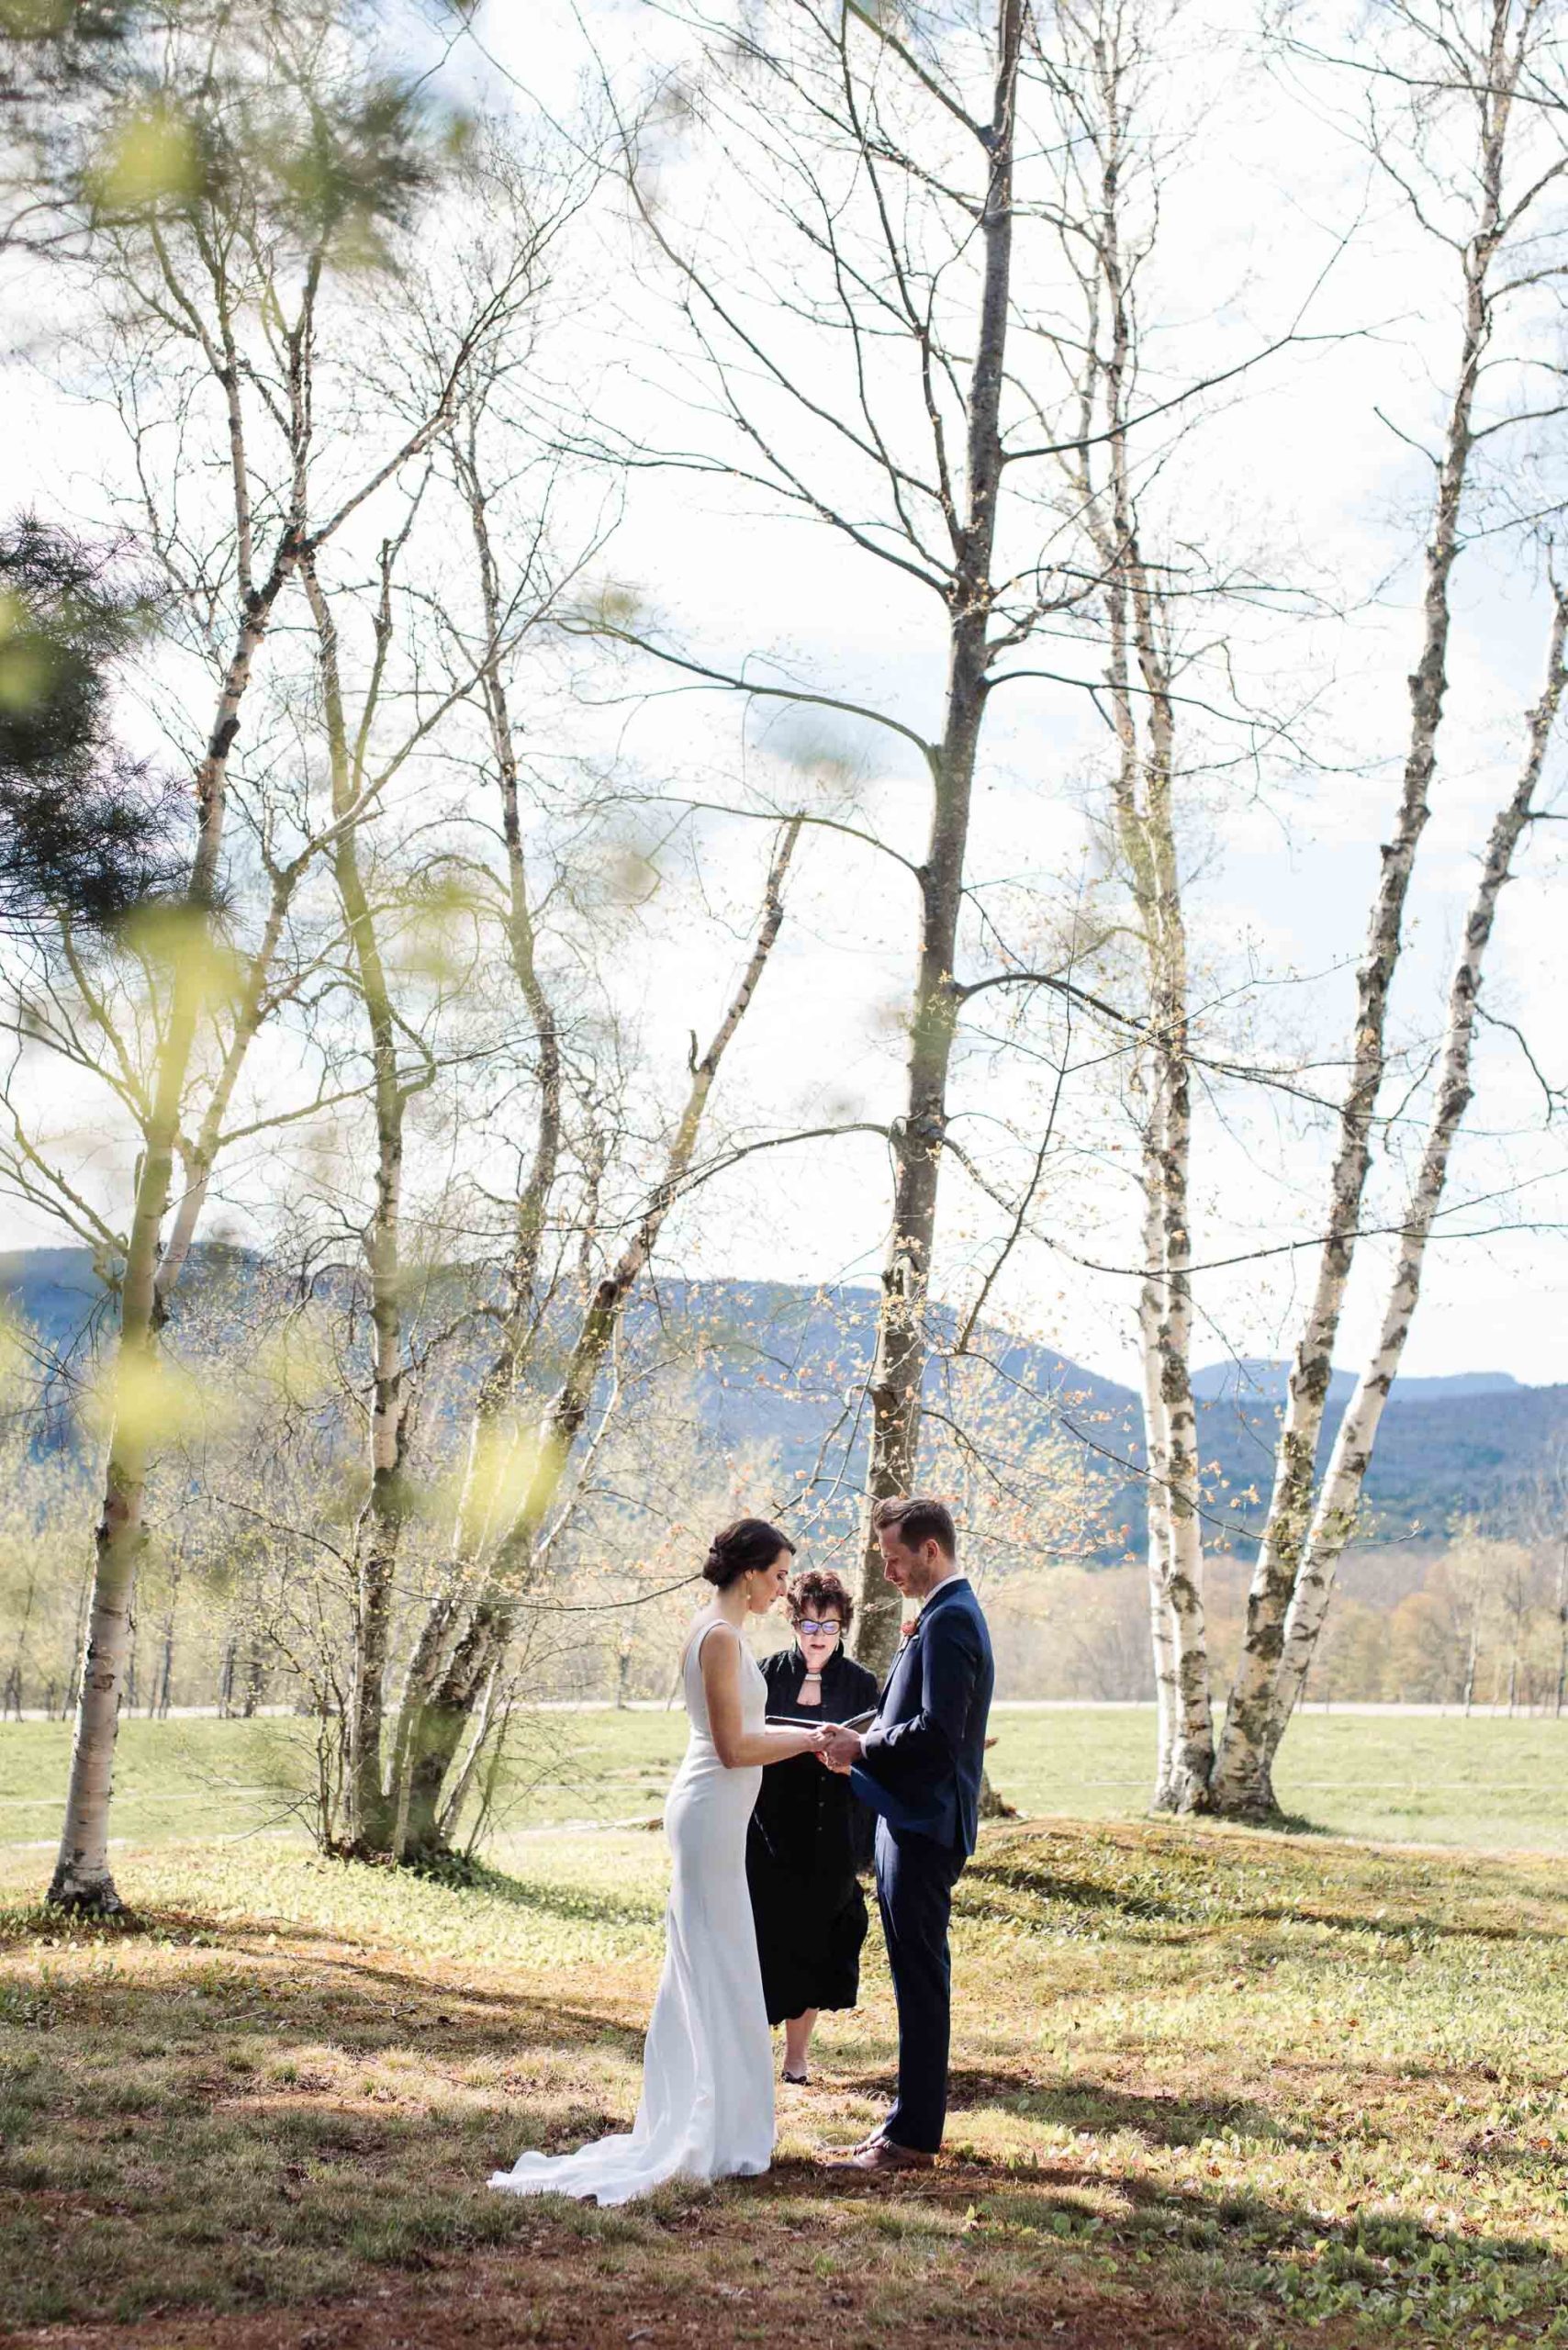 Couple embraces in Birch Grove at Trapp Family Lodge Stowe VT